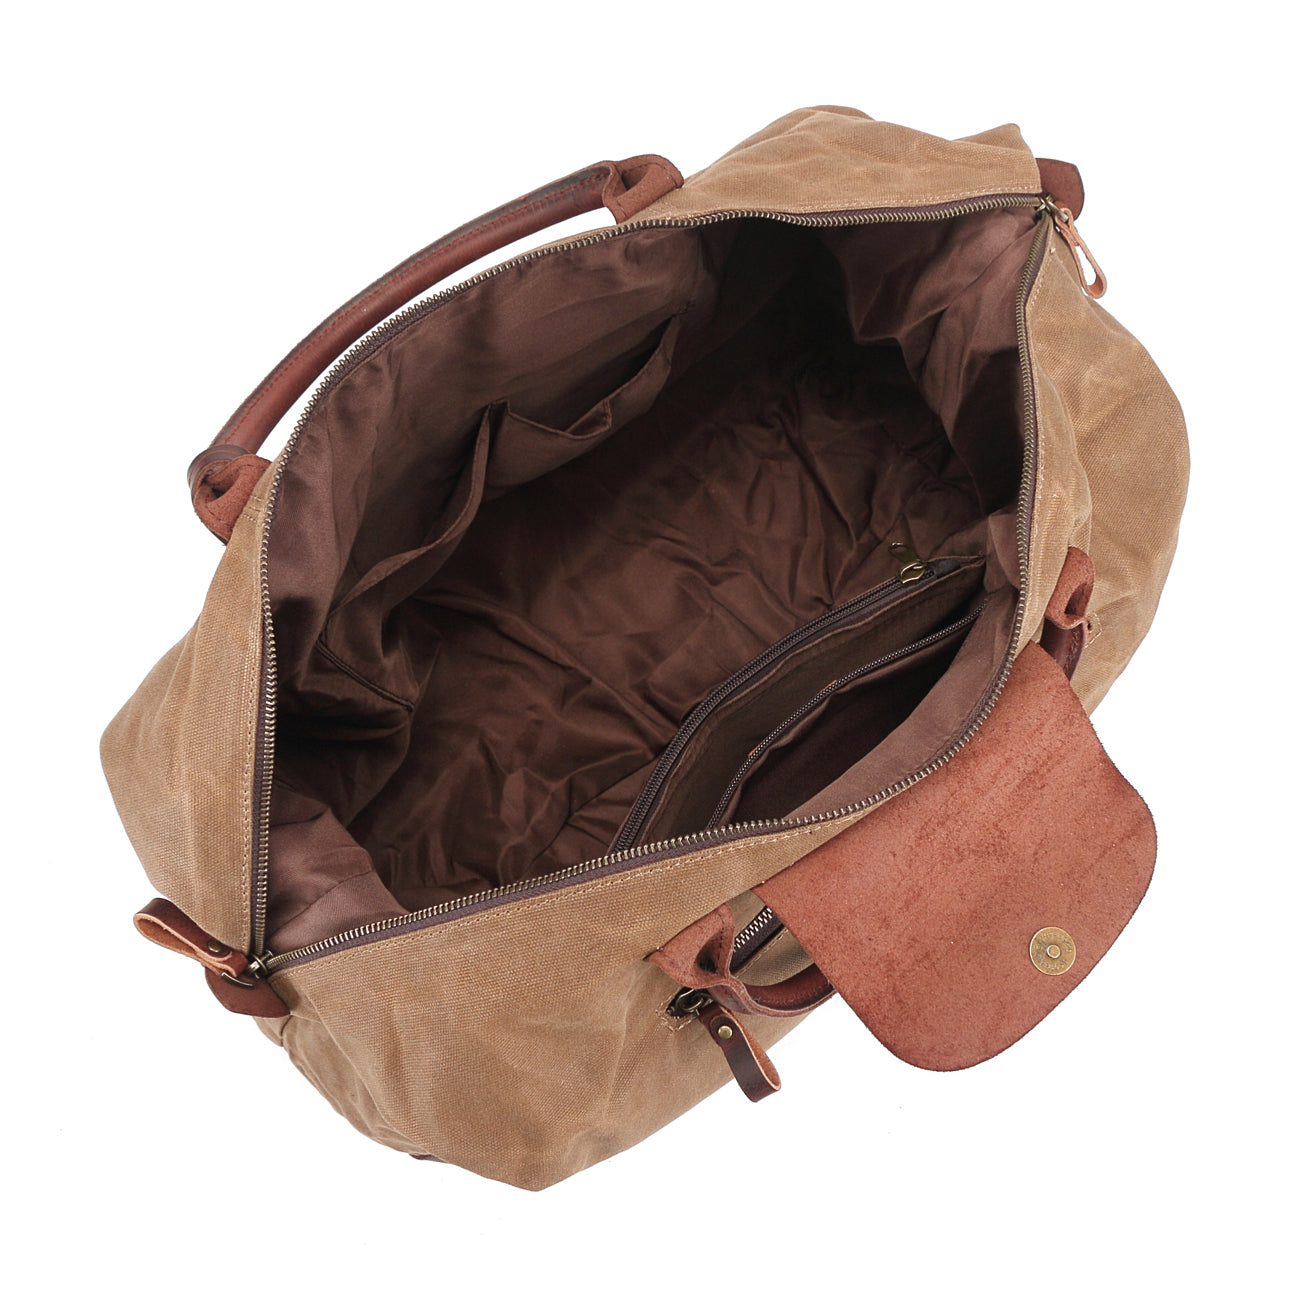 Sac Bagage fonctionnel